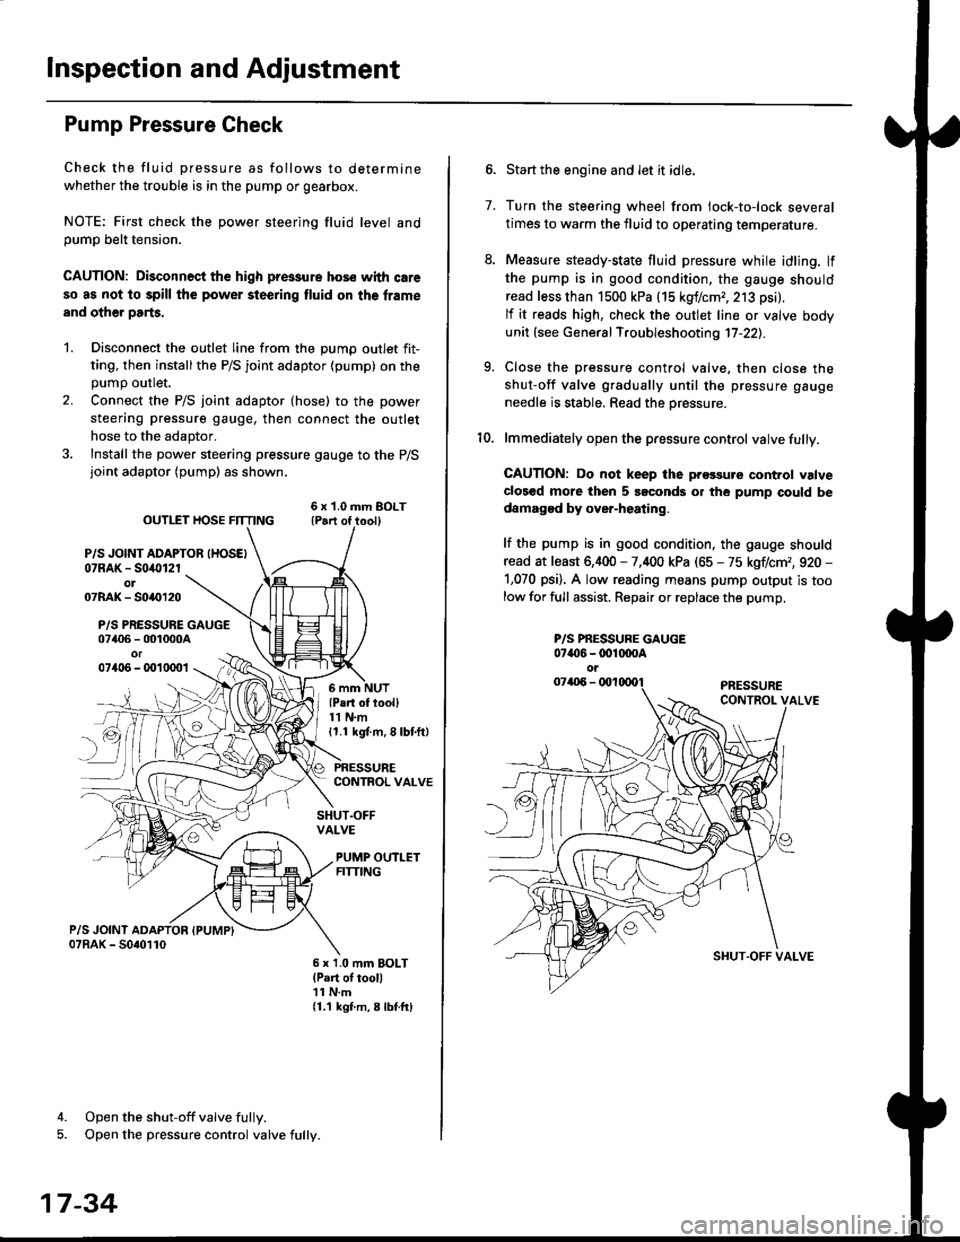 HONDA CIVIC 1999 6.G Workshop Manual lnspection and Adjustment
Pump Pressure Check
Check the fluid pressure as follows to determine
whether the trouble is in the pump or gearbox.
NOTE: First check the power steering fluid level andpump b